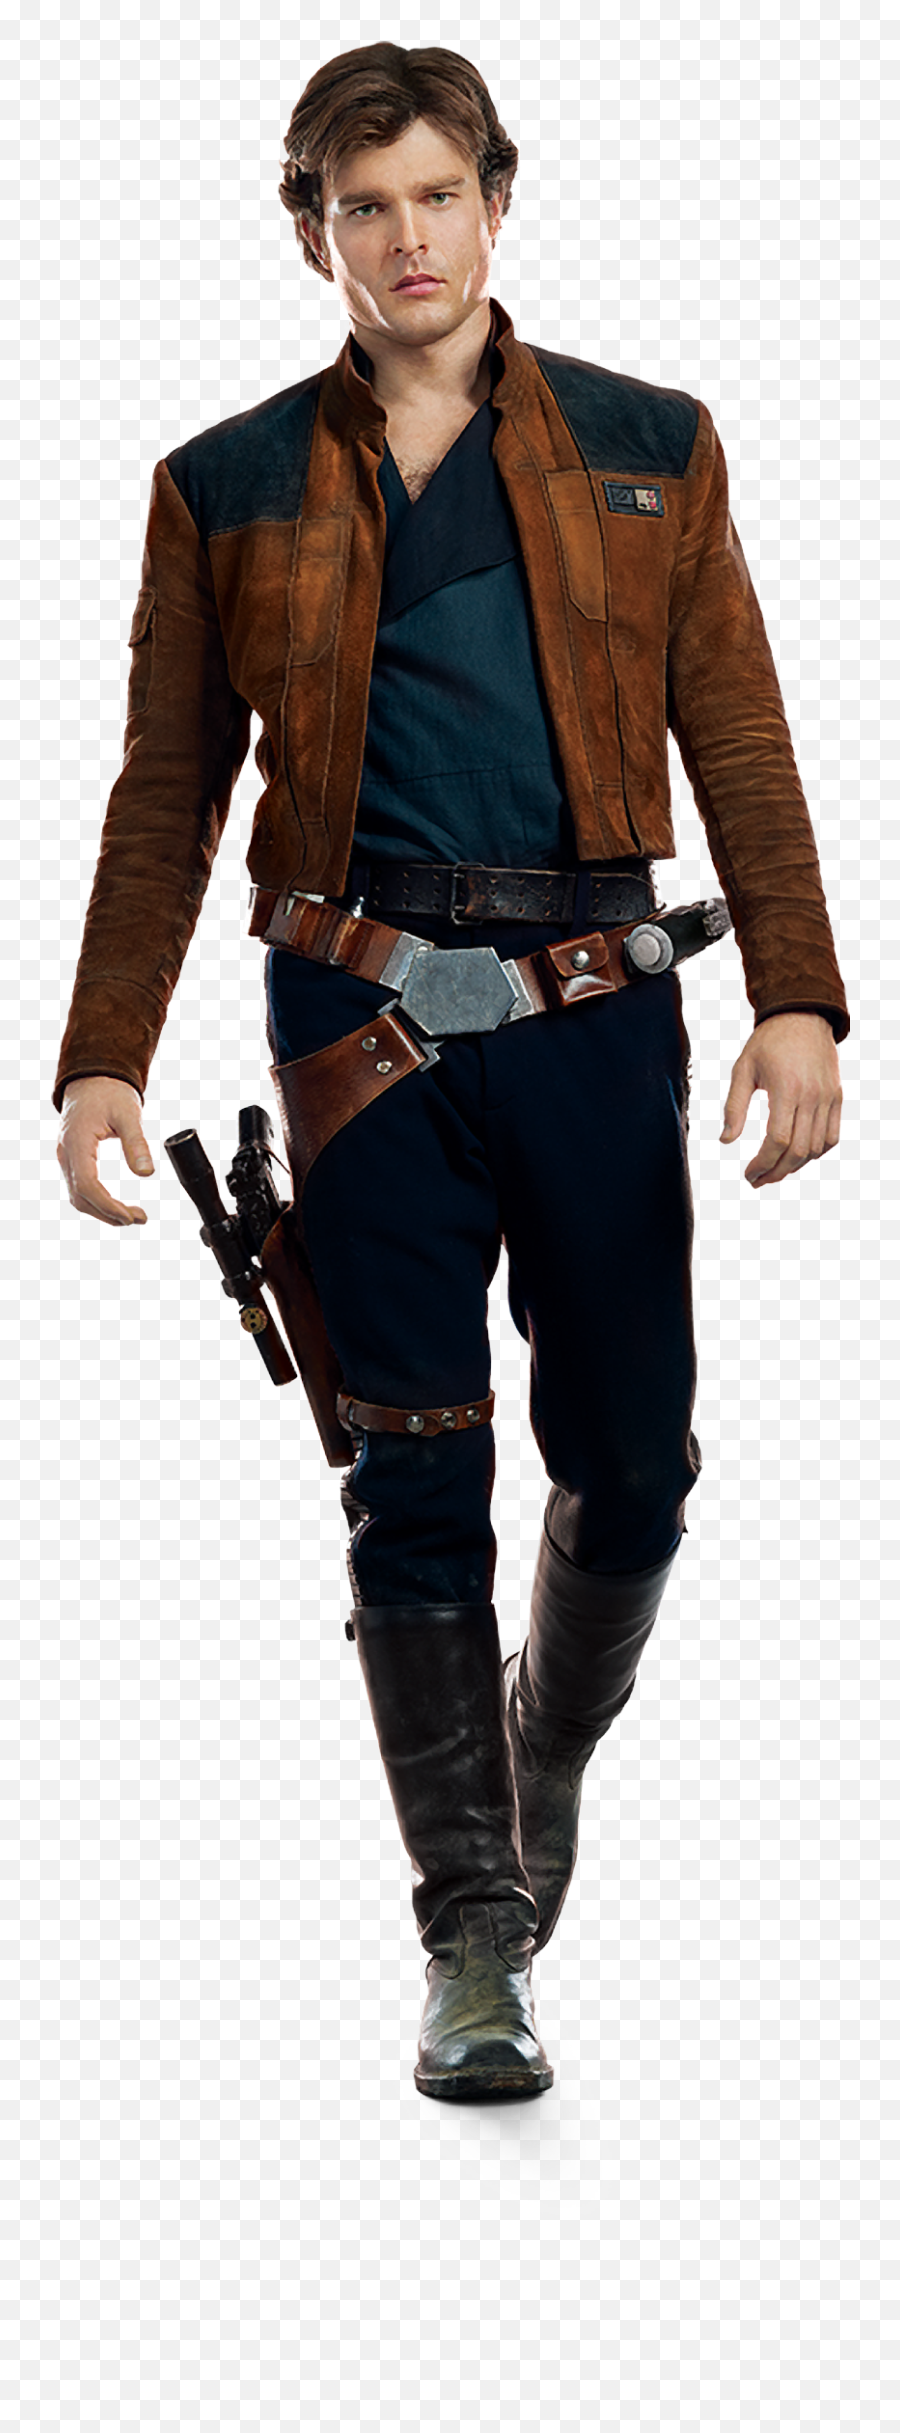 Star Wars Story - Solo A Star Wars Story Han Solo Png,Han Solo Png